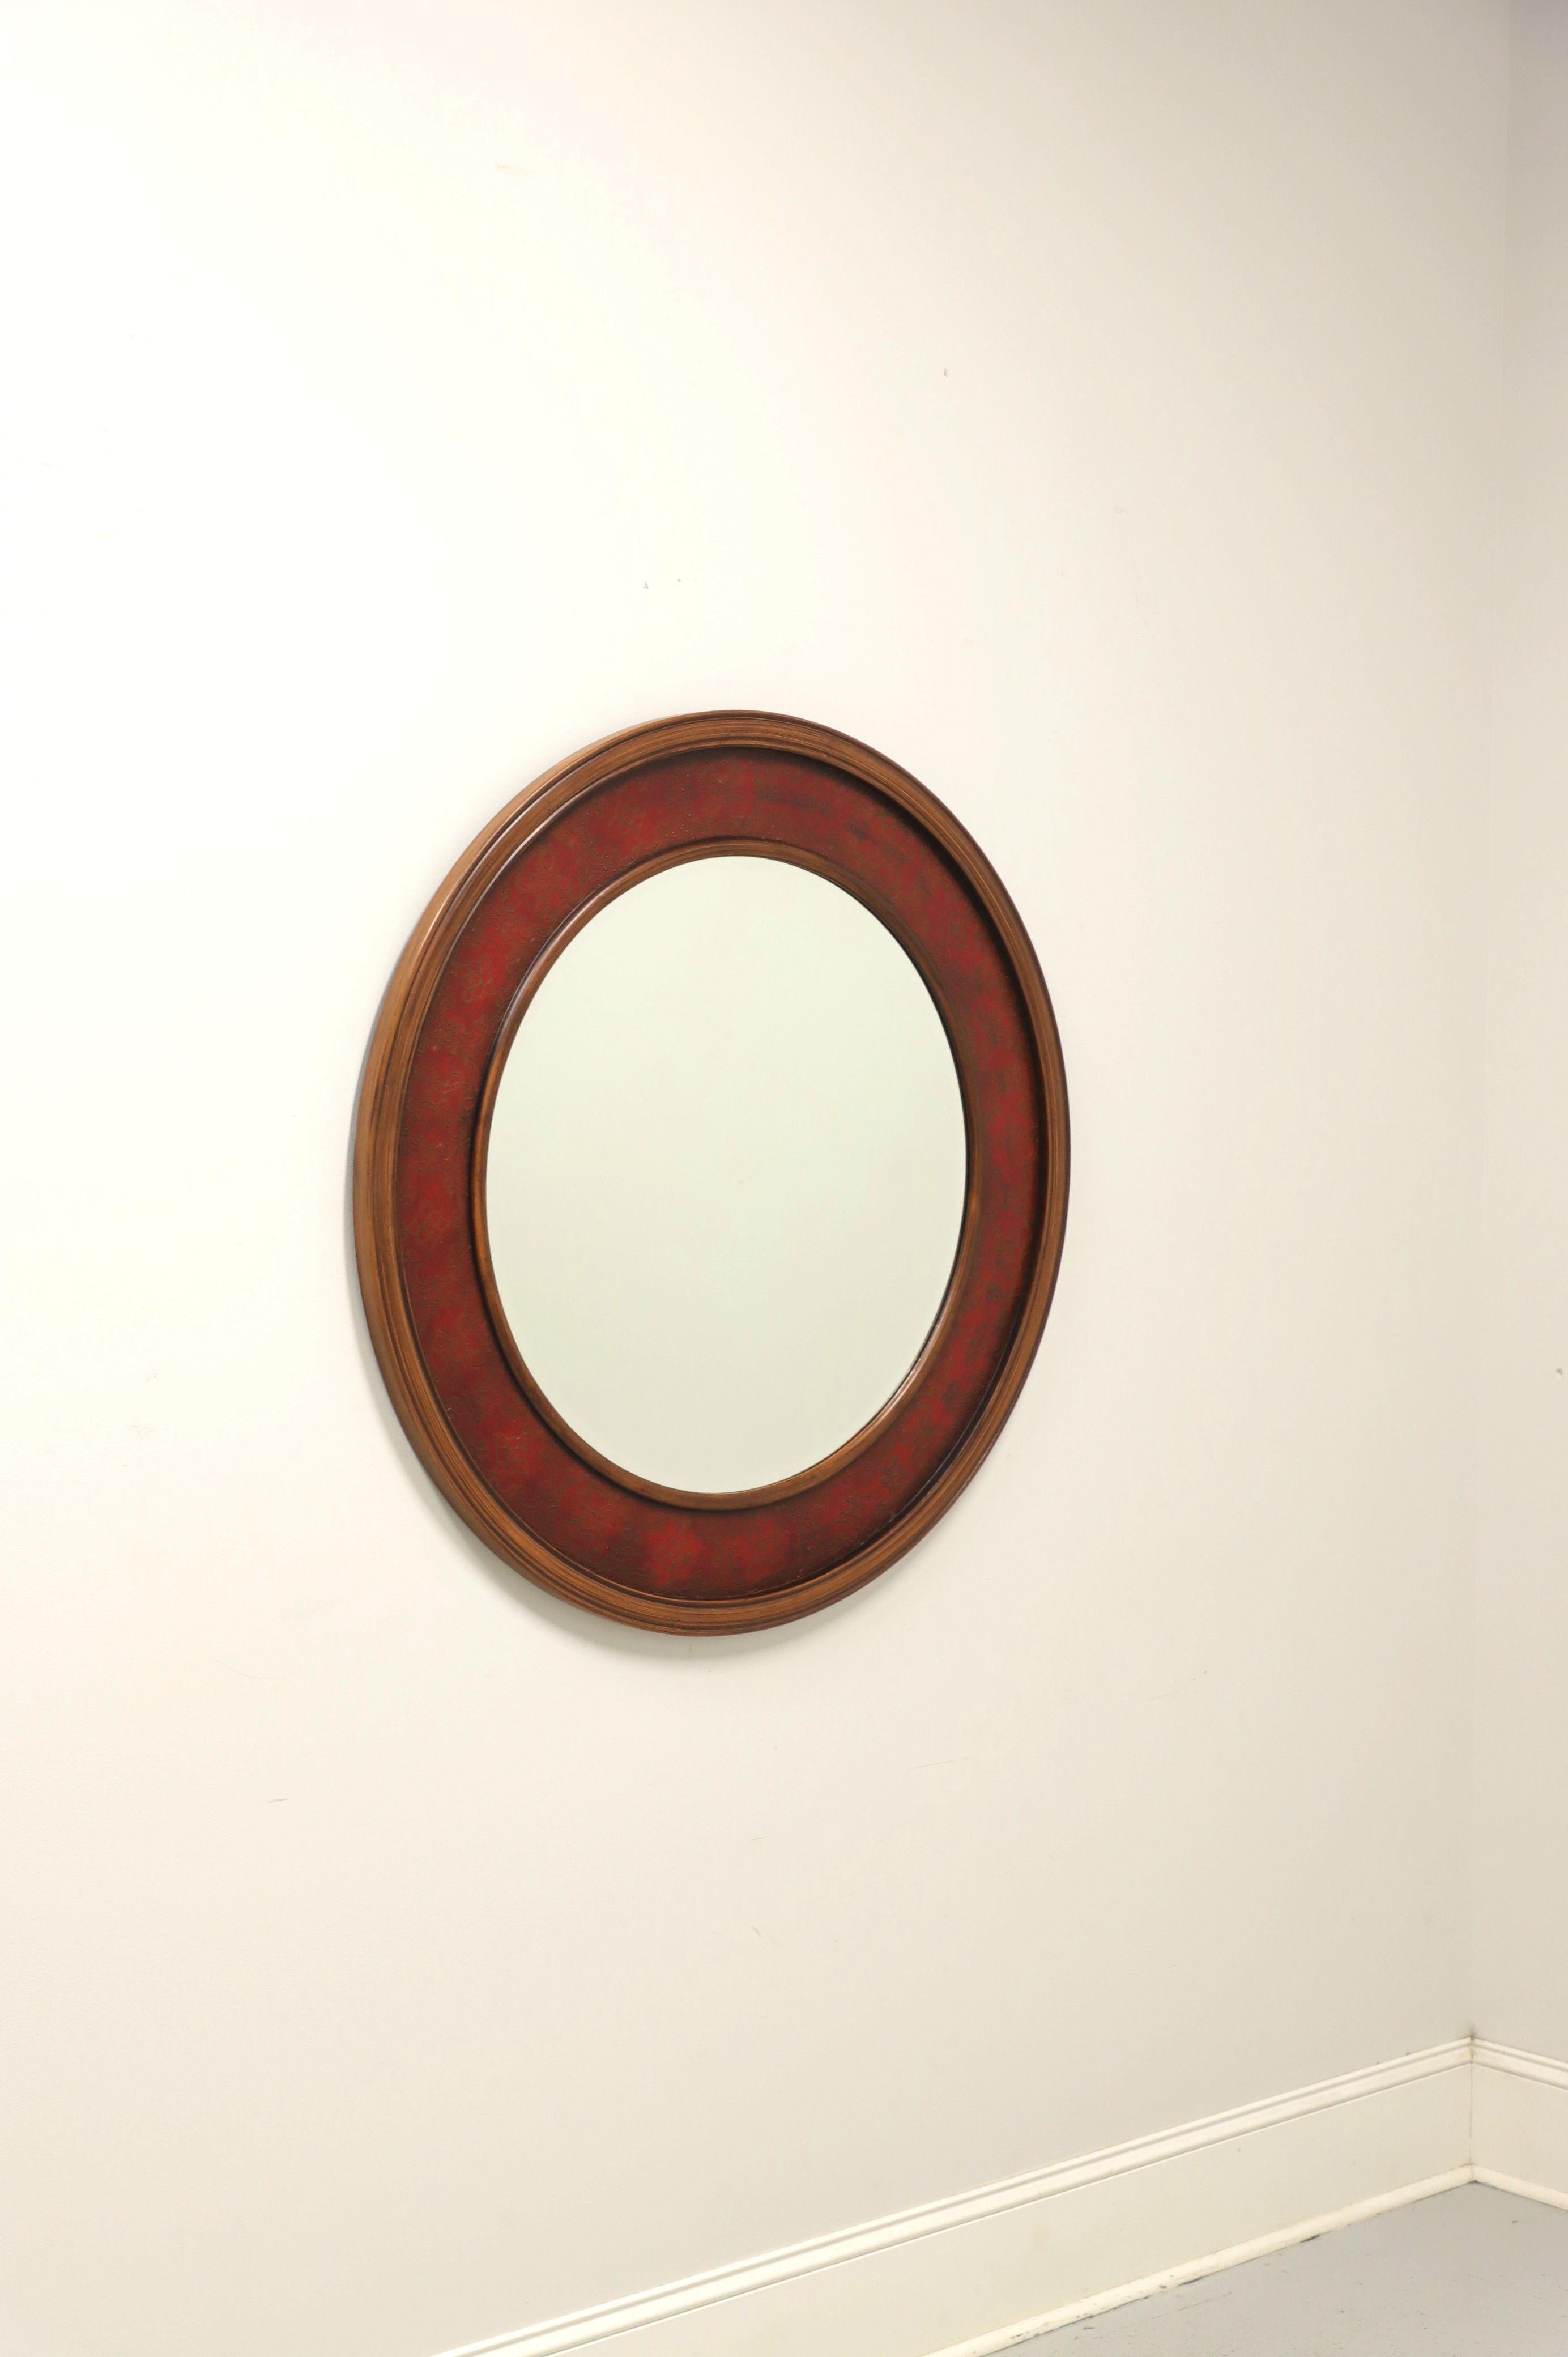 An Asian Chinoiserie style round wall mirror by Oriental Accent. Beveled mirror glass in a round wood frame with a middle circle of hand painted red & bronze decorative Chinoiserie and an inner & outer circle of walnut colored wood. Made in Asia, in